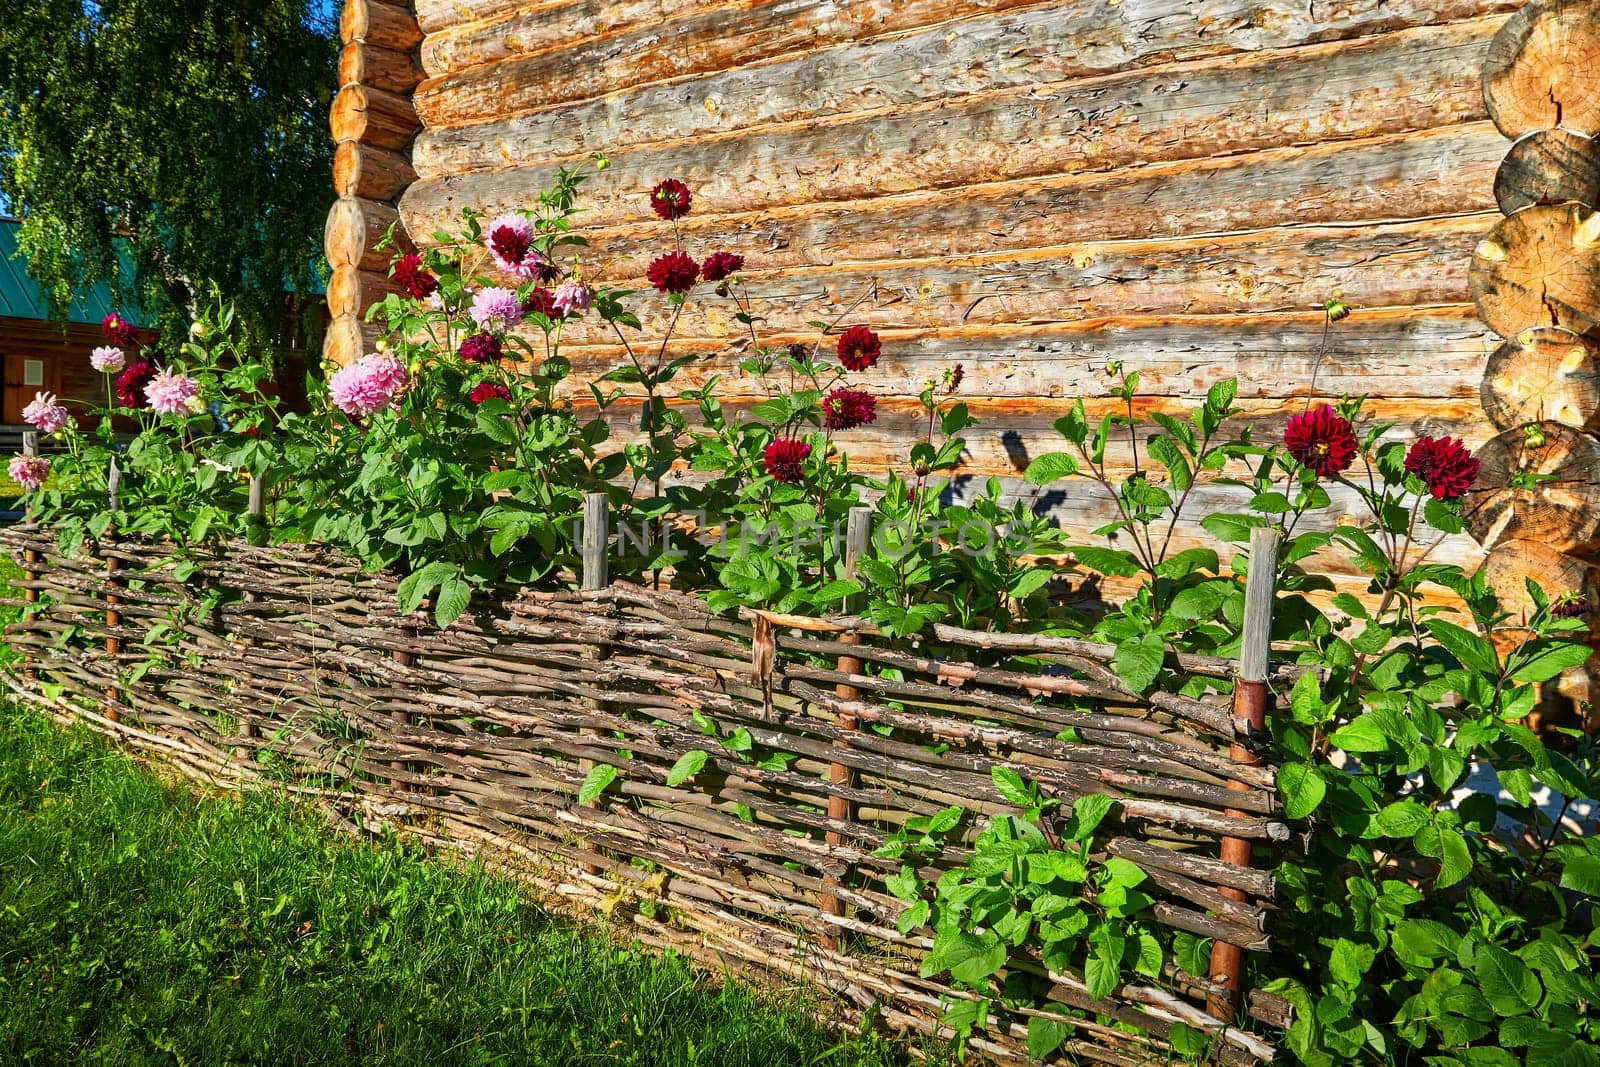 Beautiful red flowers behind a wattle fence and a wicker fence near a wooden village house made of logs. Flowering on a sunny summer day by keleny